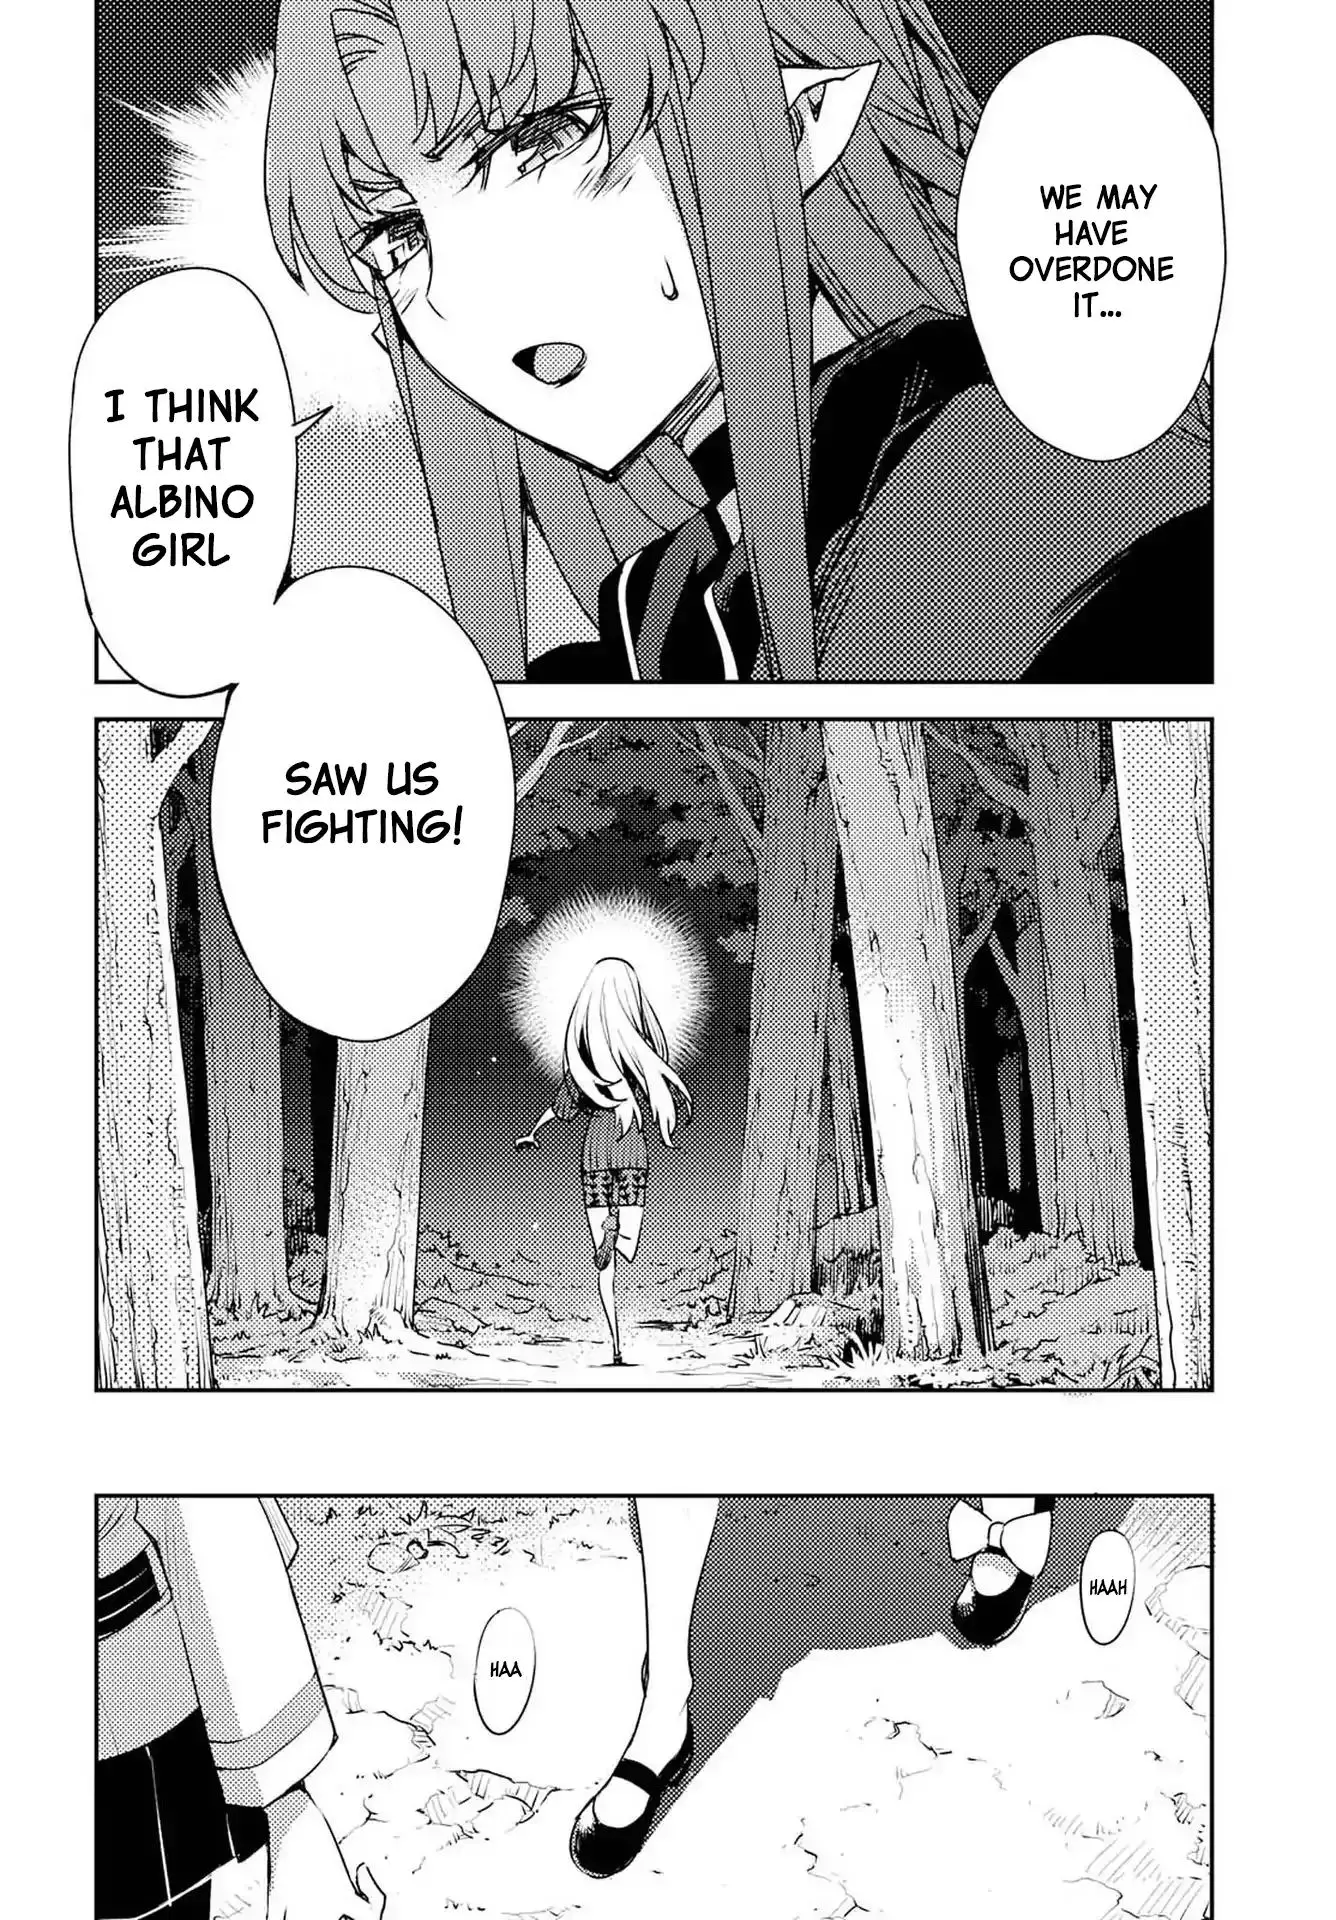 Fate/grand Order: Epic Of Remnant - Subspecies Singularity Iv: Taboo Advent Salem: Salem Of Heresy - 3 page 6